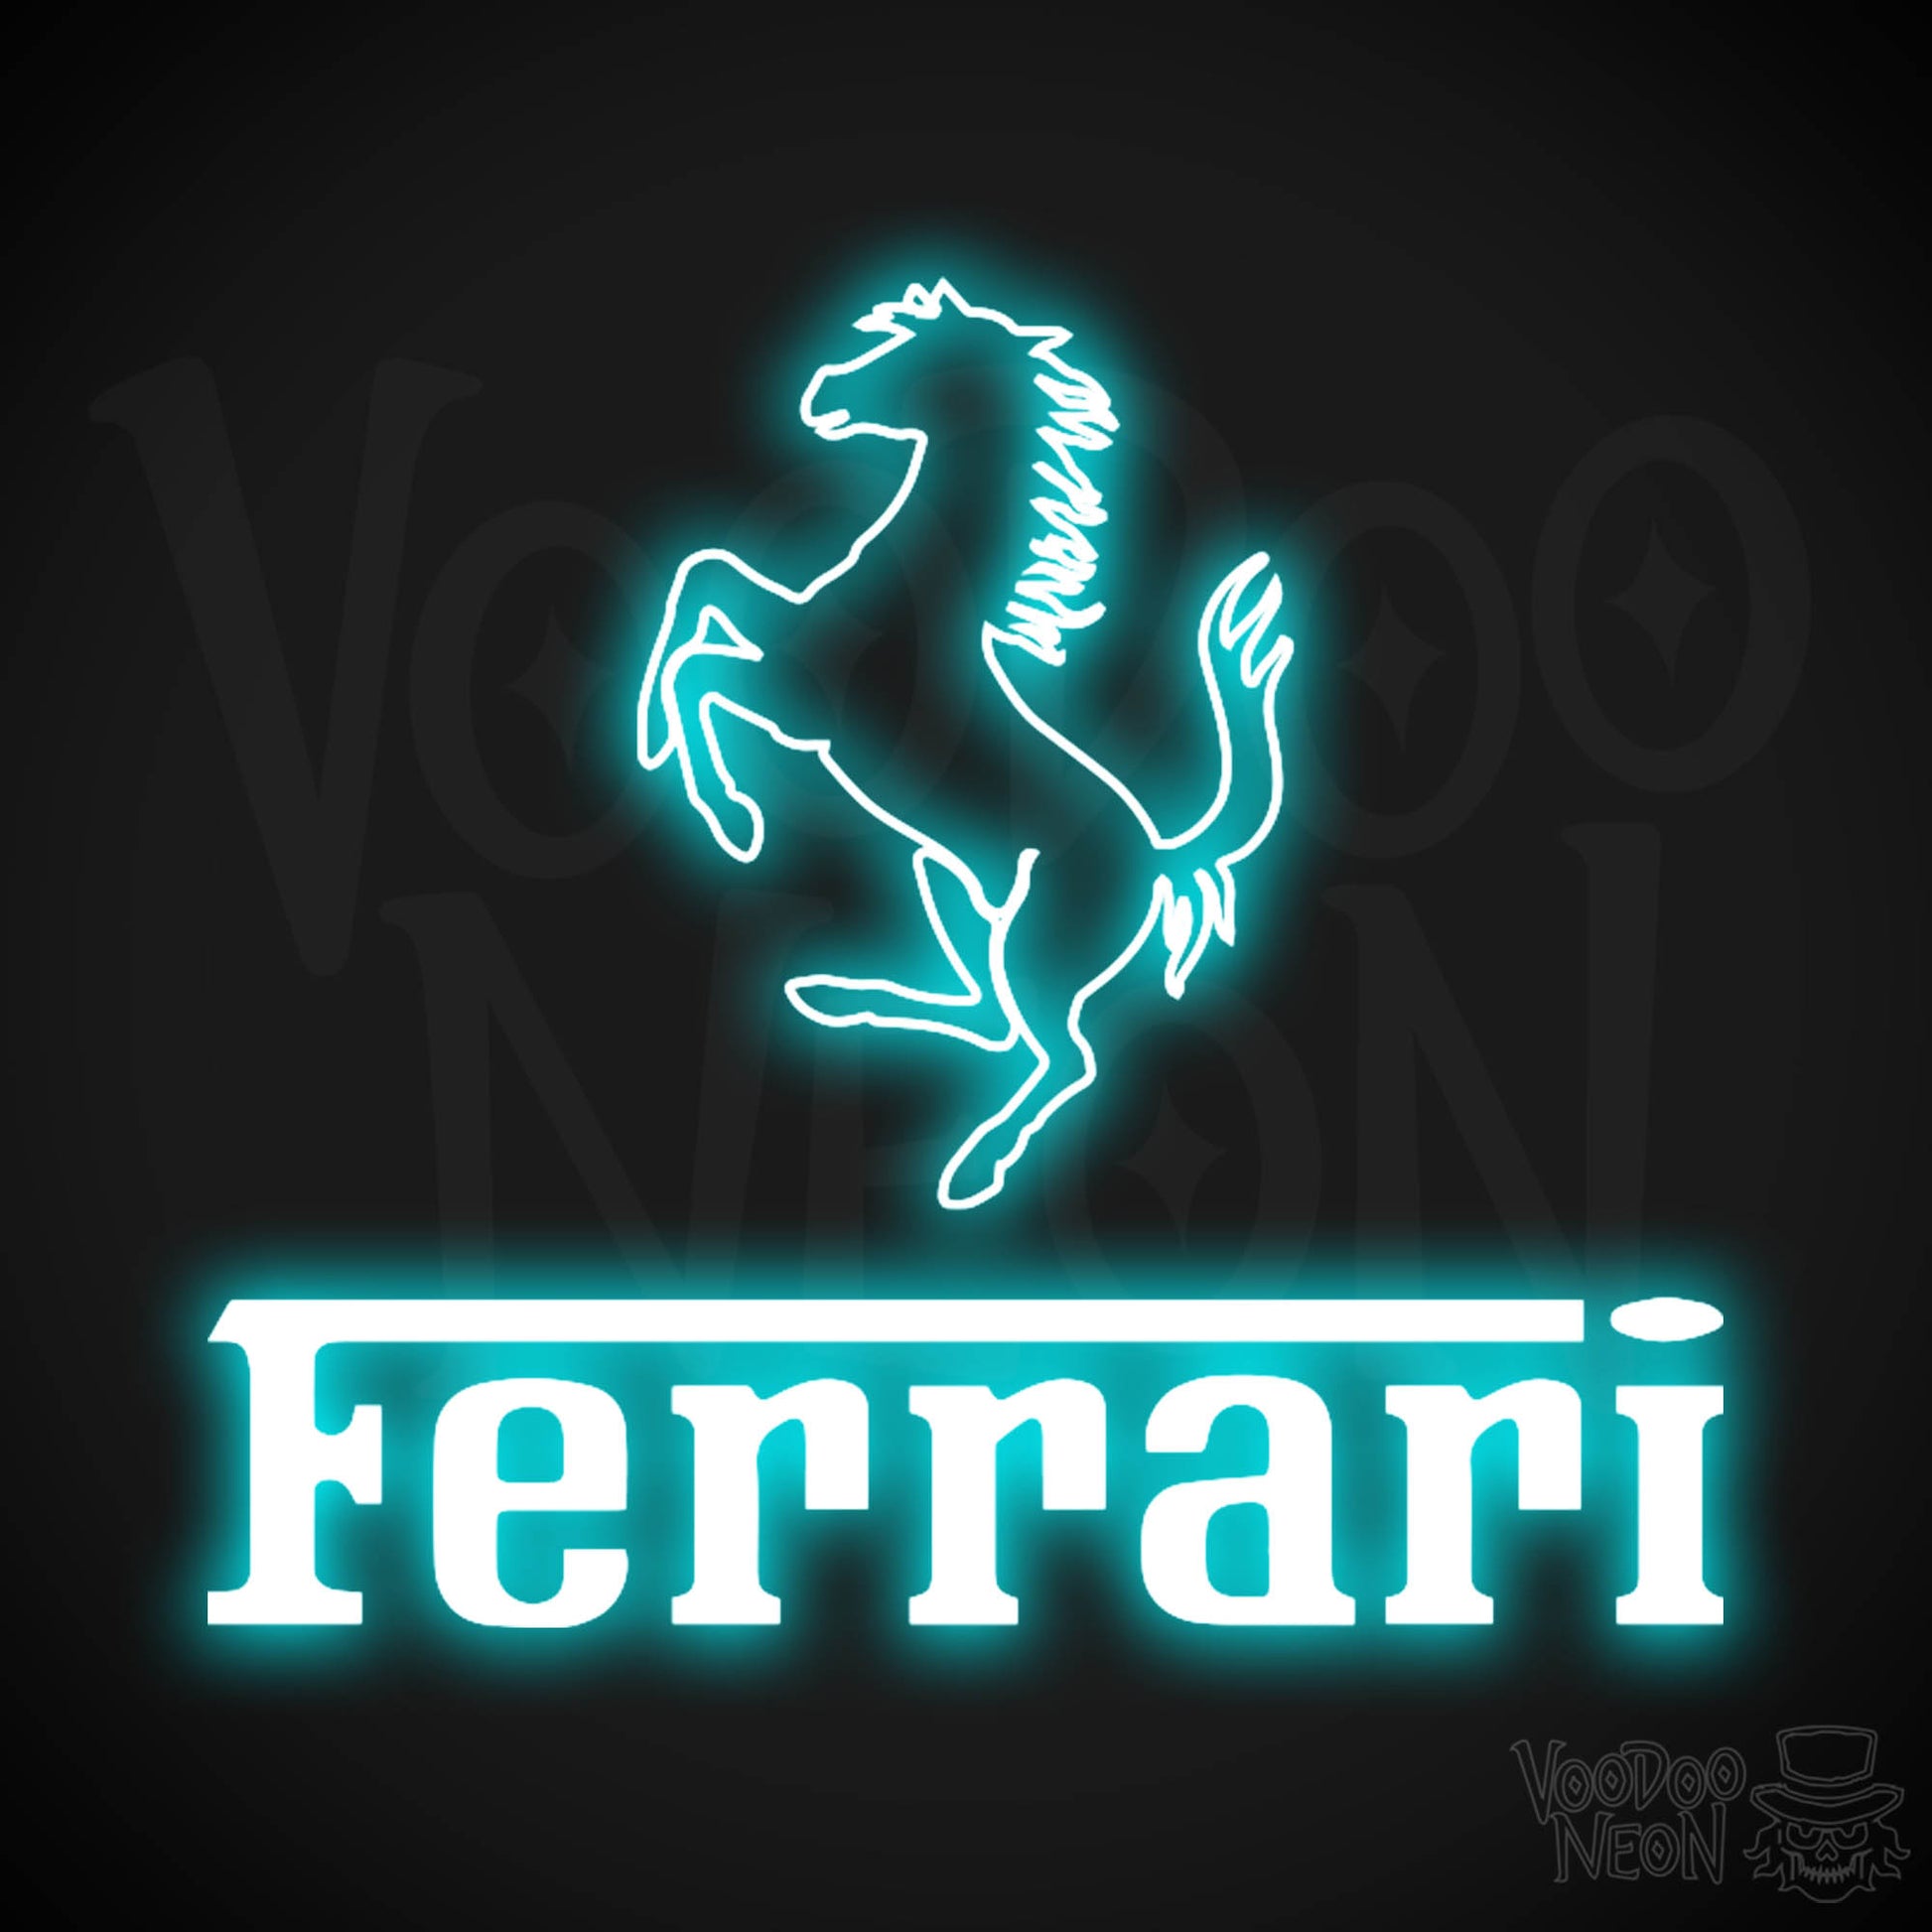 Ferrari Neon Sign - Neon Ferrari Sign - Ferrari Logo Wall Art - Color Ice Blue